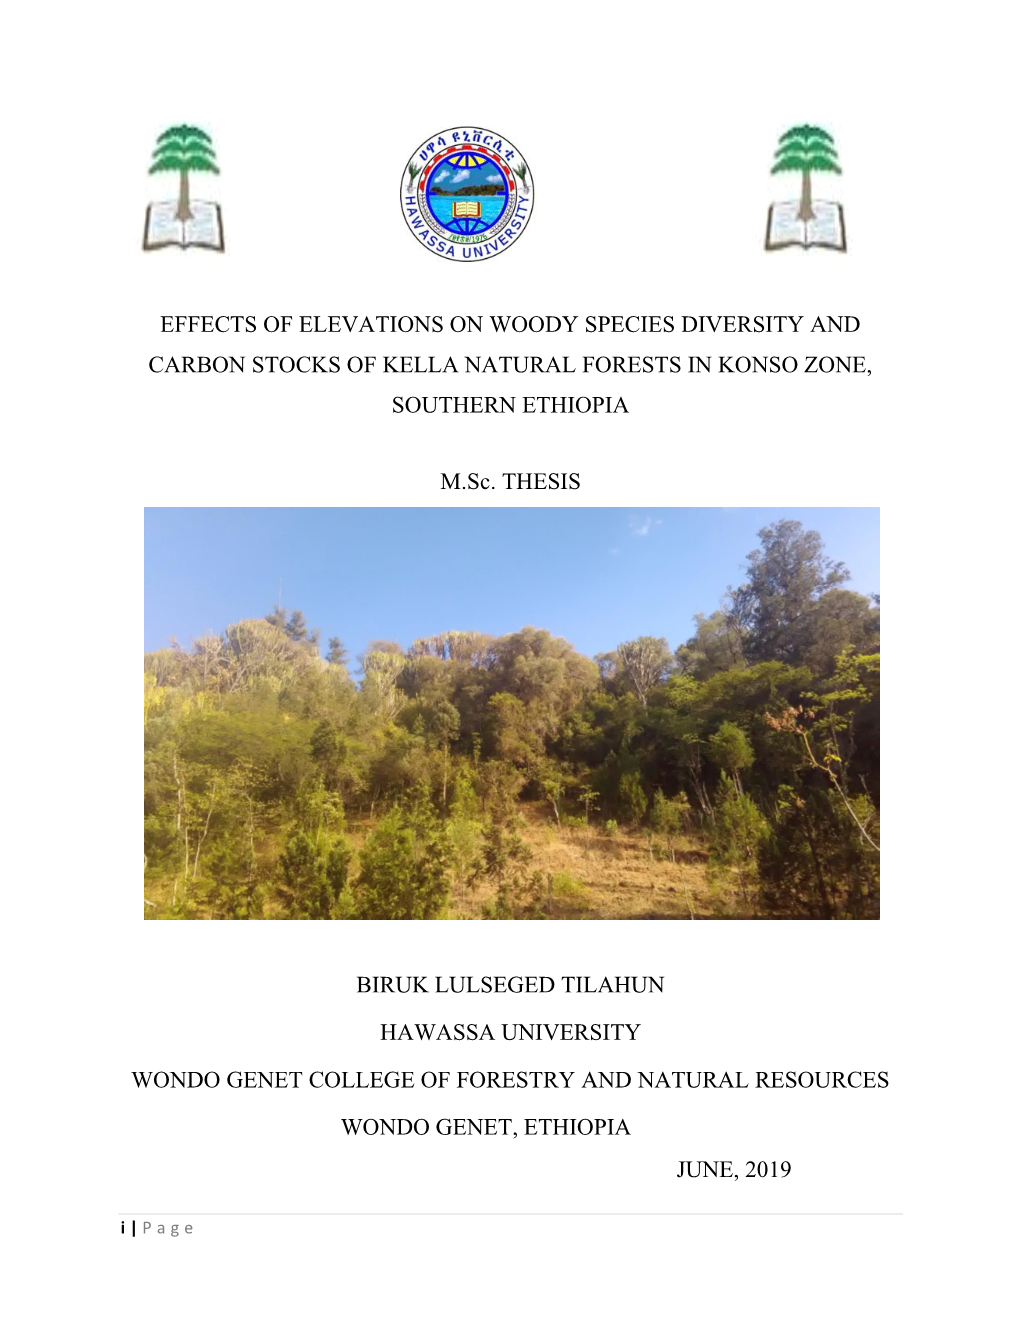 Effects of Elevations on Woody Species Diversity and Carbon Stocks of Kella Natural Forests in Konso Zone, Southern Ethiopia